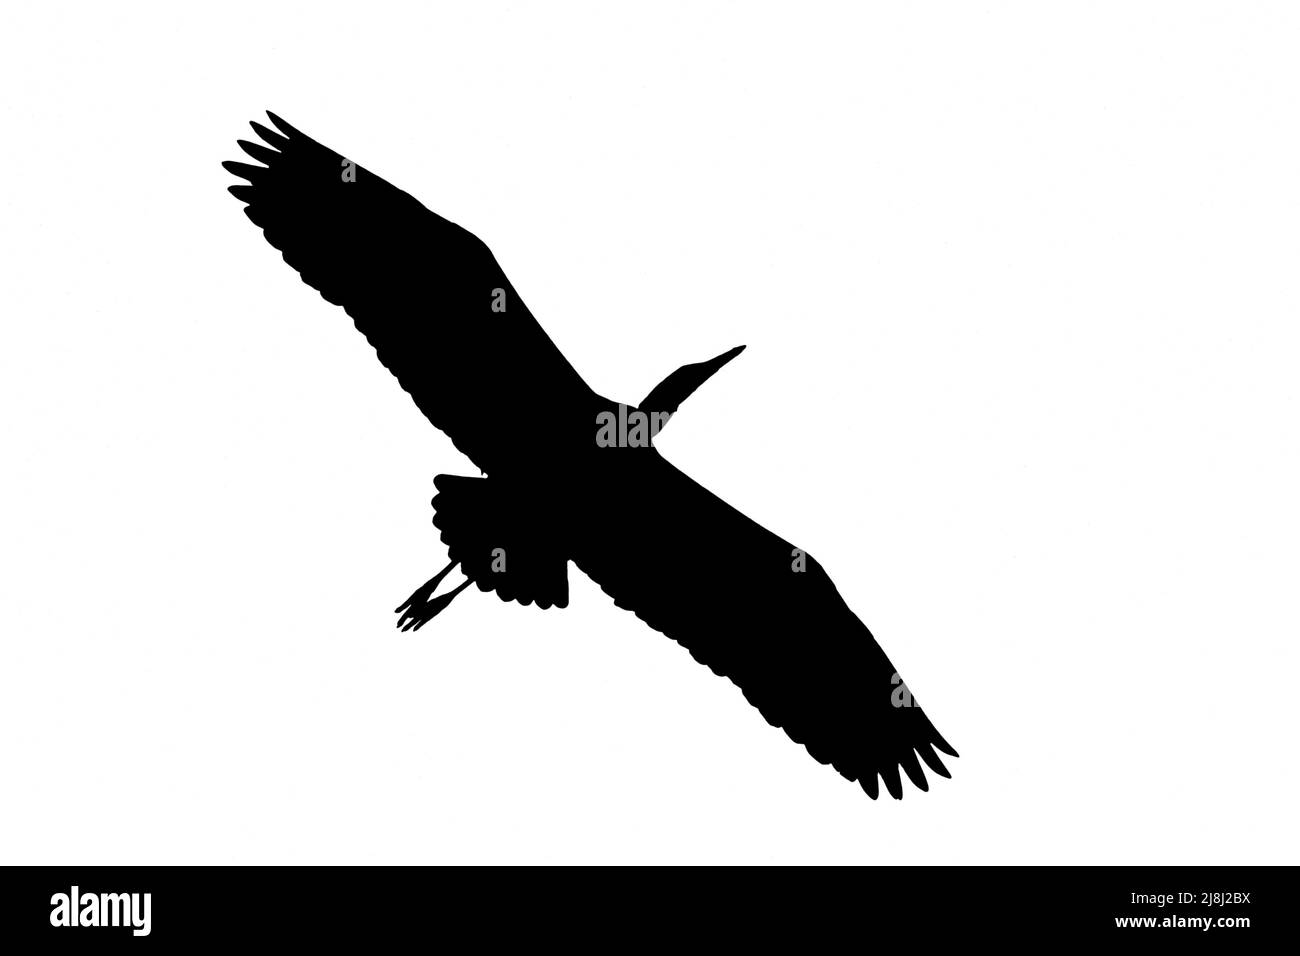 Silhouette of grey heron / gray heron (Ardea cinerea) in flight outlined against white background to show wings, head and tail shapes Stock Photo